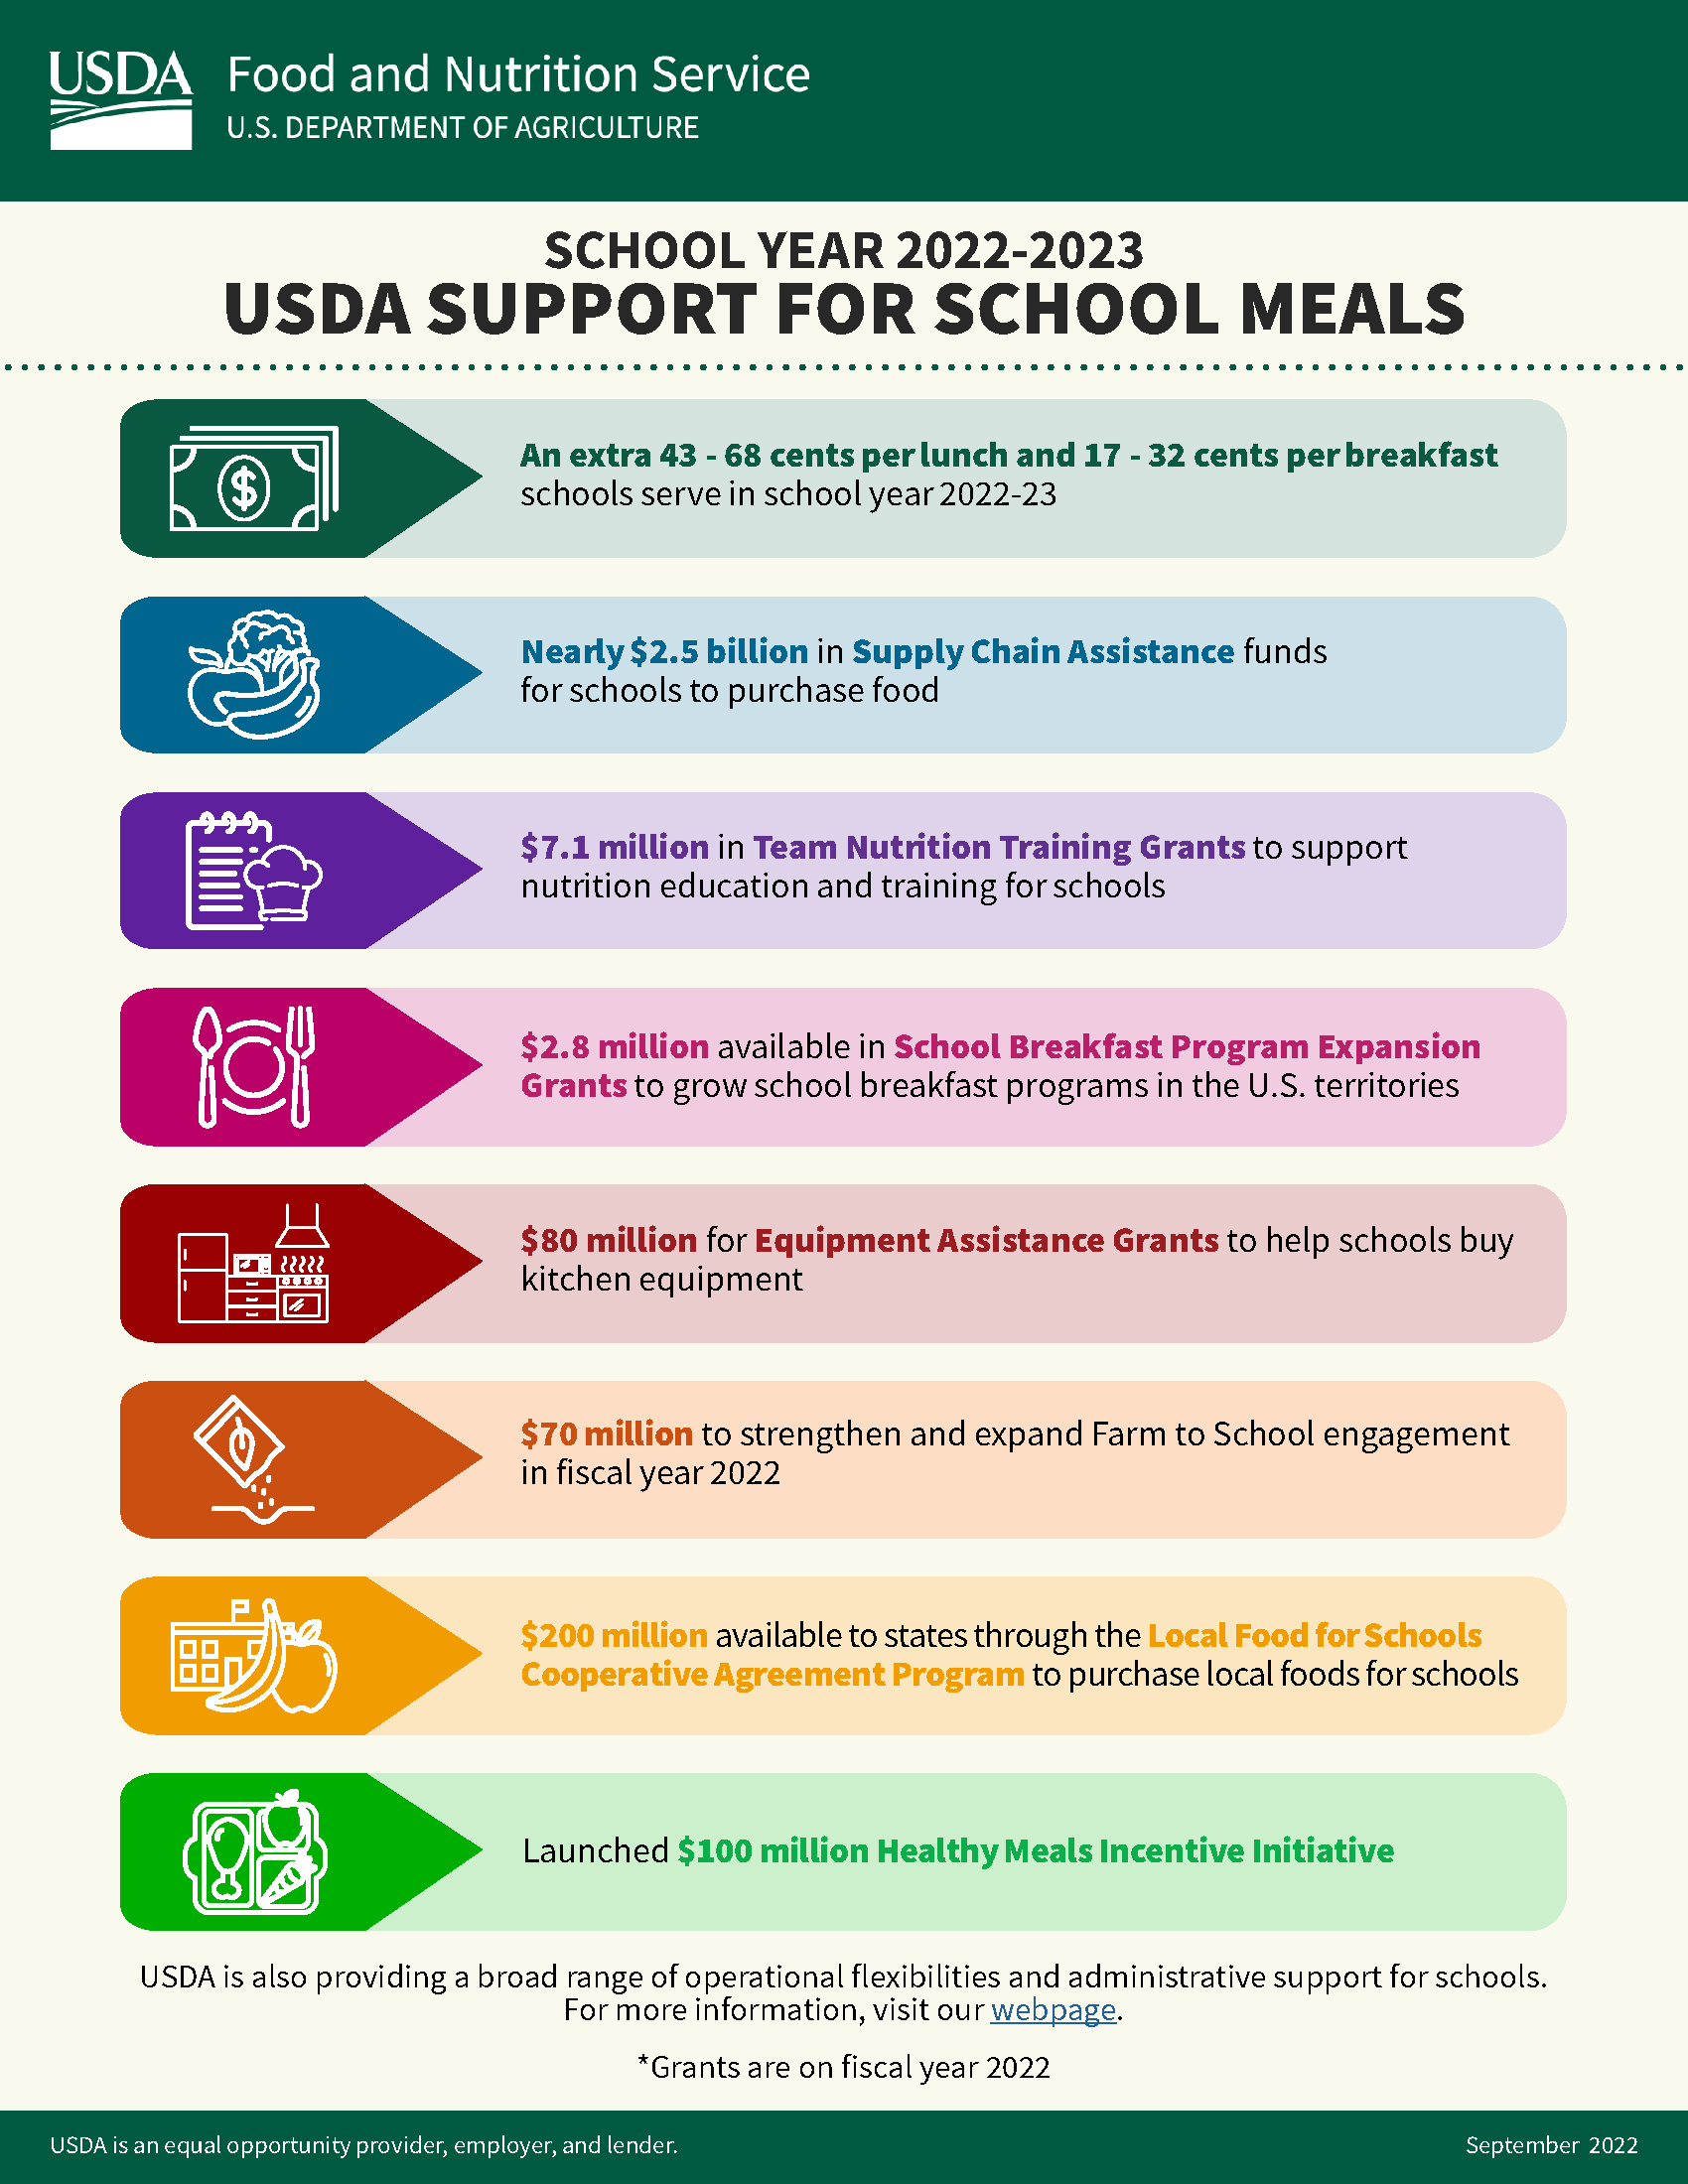 School Year 2022-2023 USDA Support for School Meals infographic